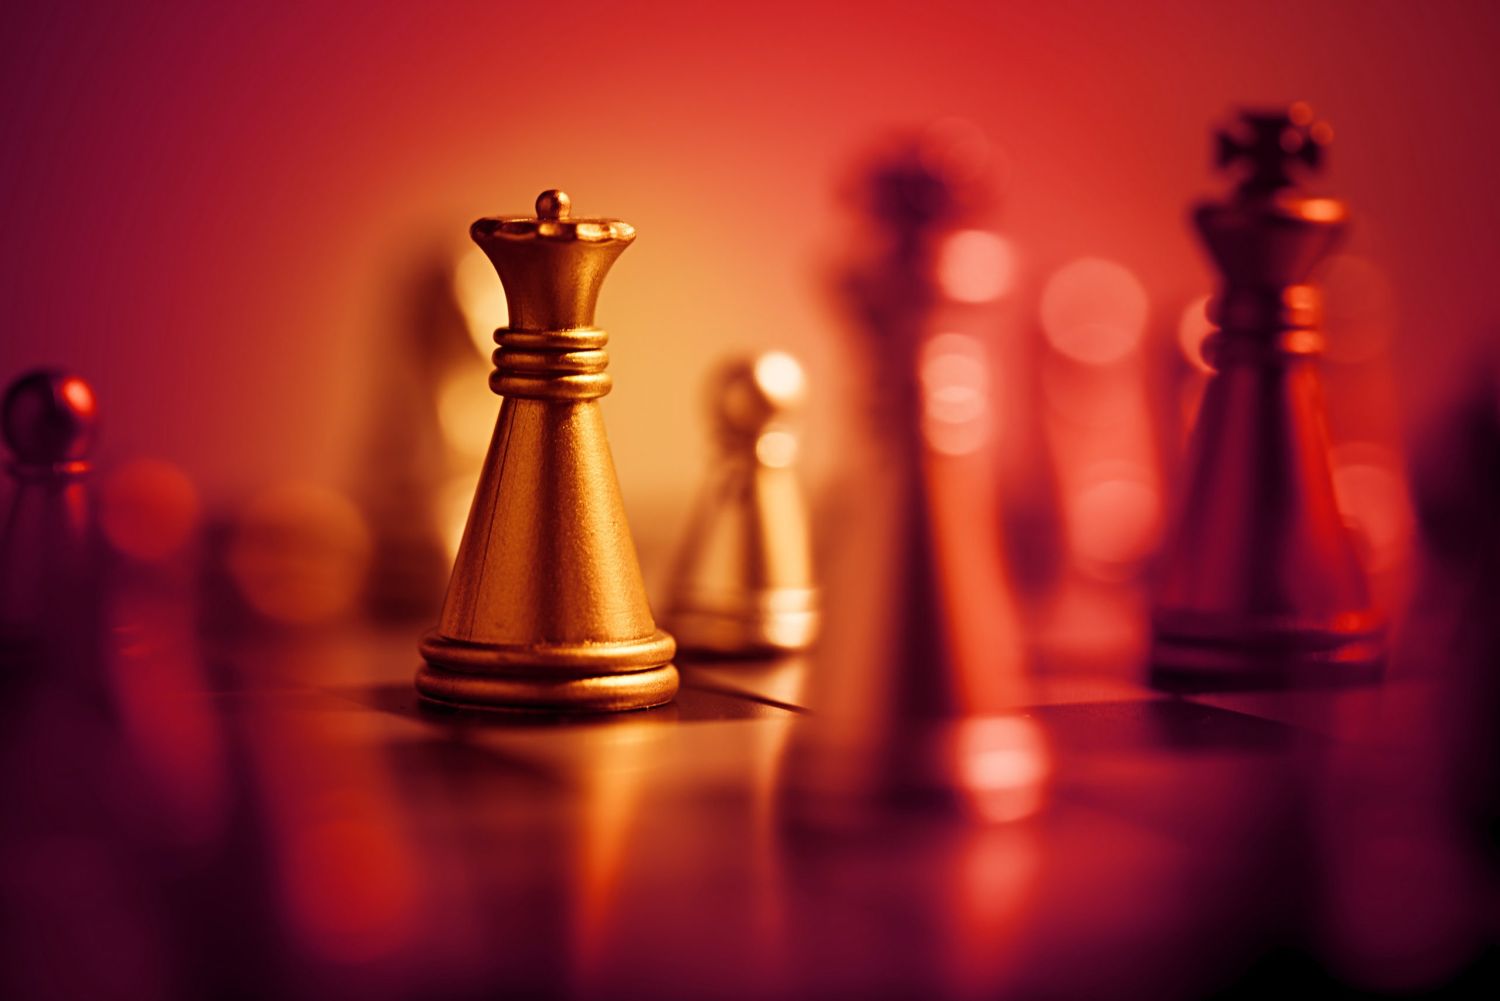 Playing Chess with the Adversary: Value in Security Controls